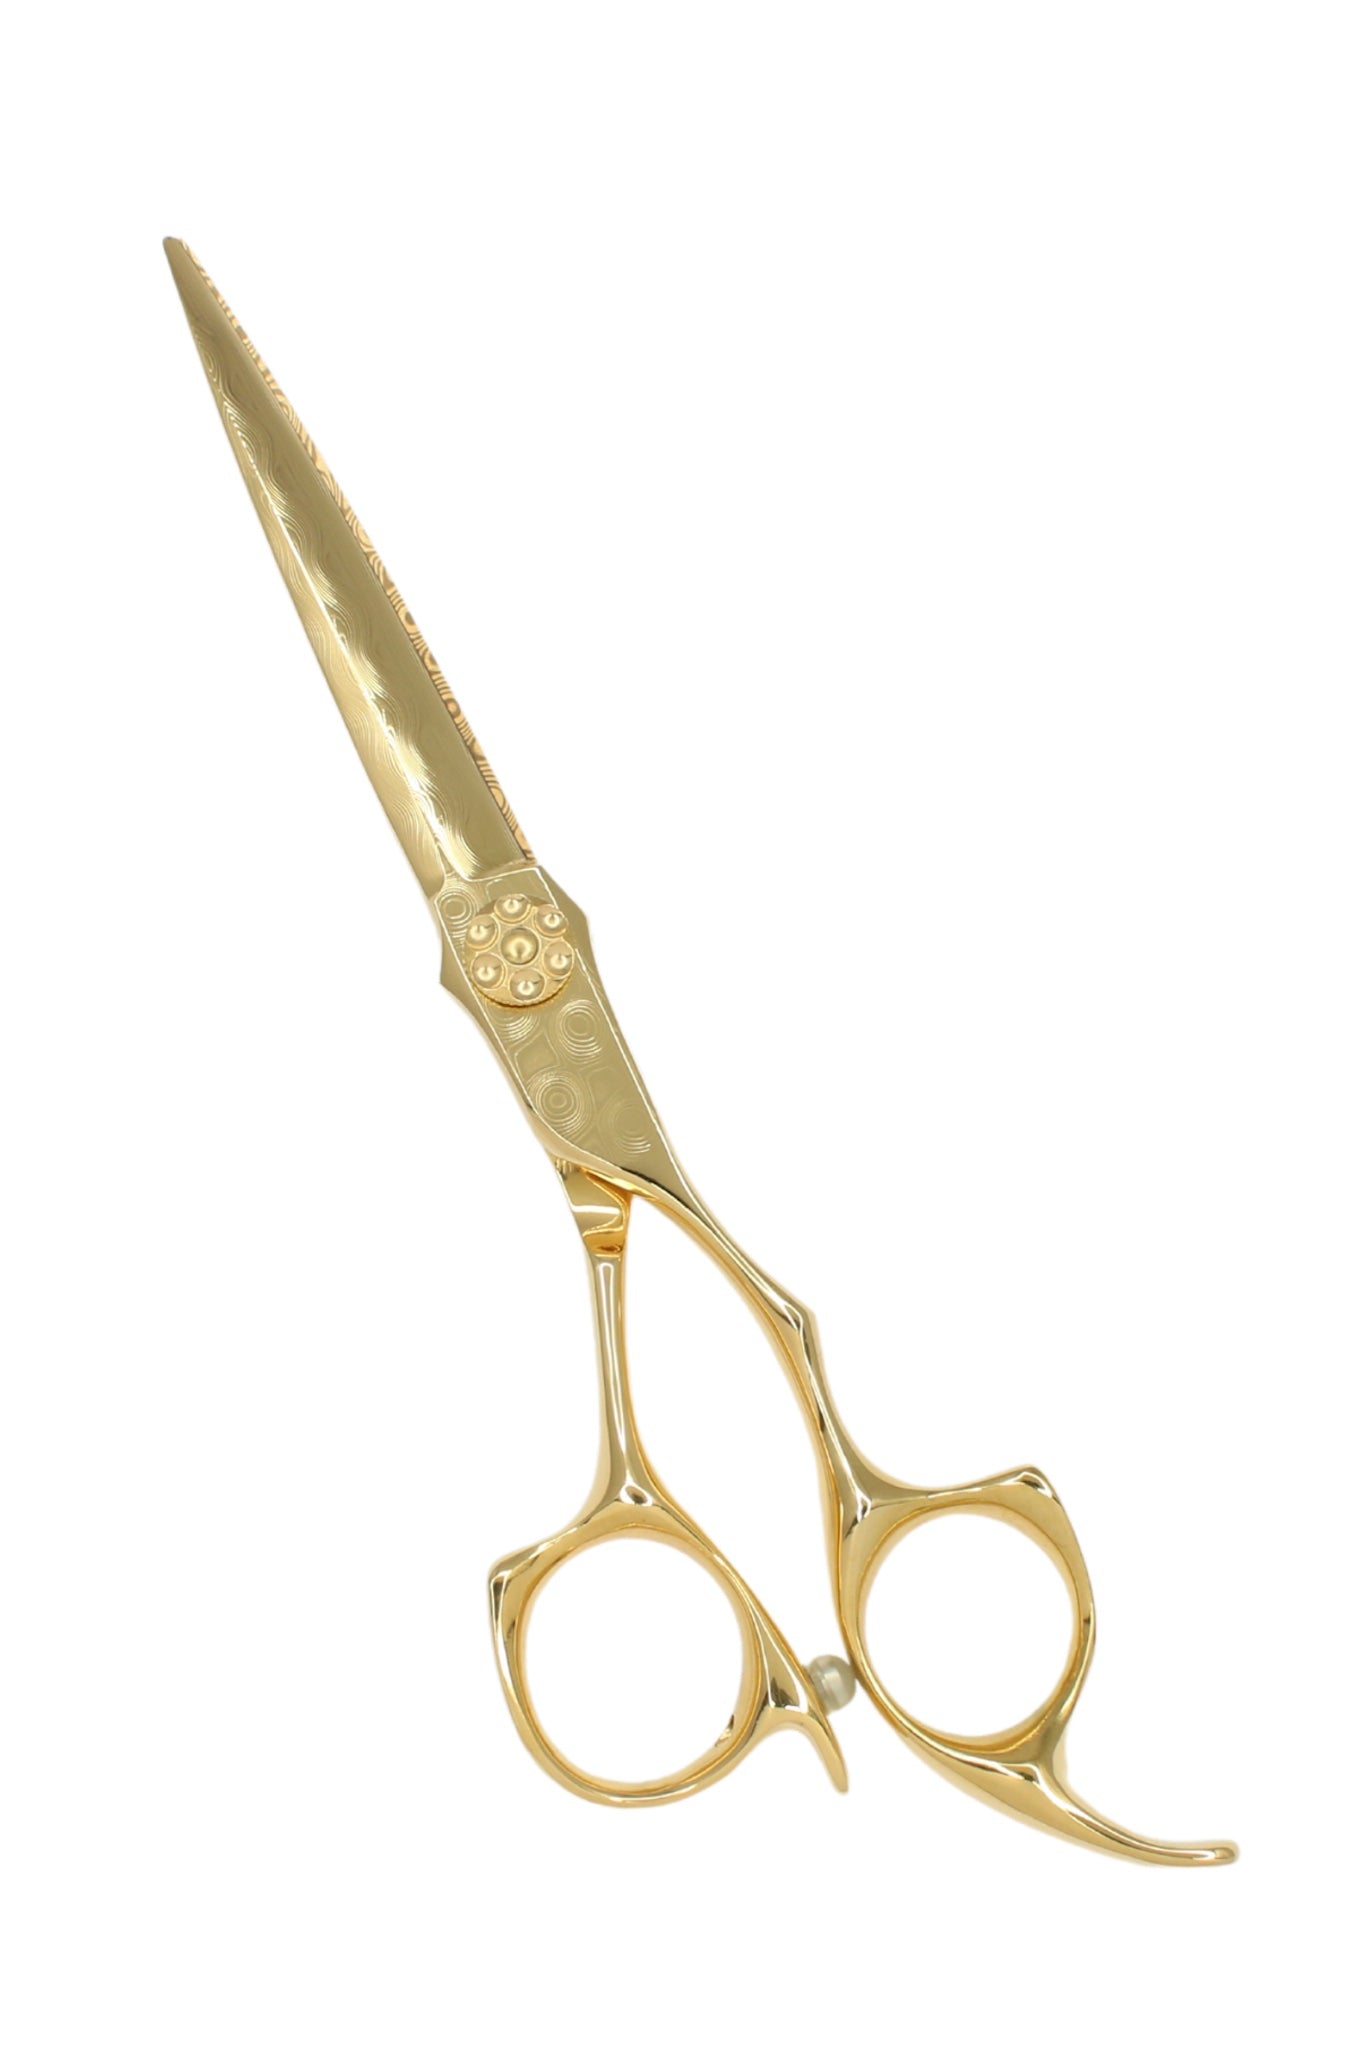 iCandy DAMASCUS ALL STAR Yellow Gold Scissor 6.5" Pic1